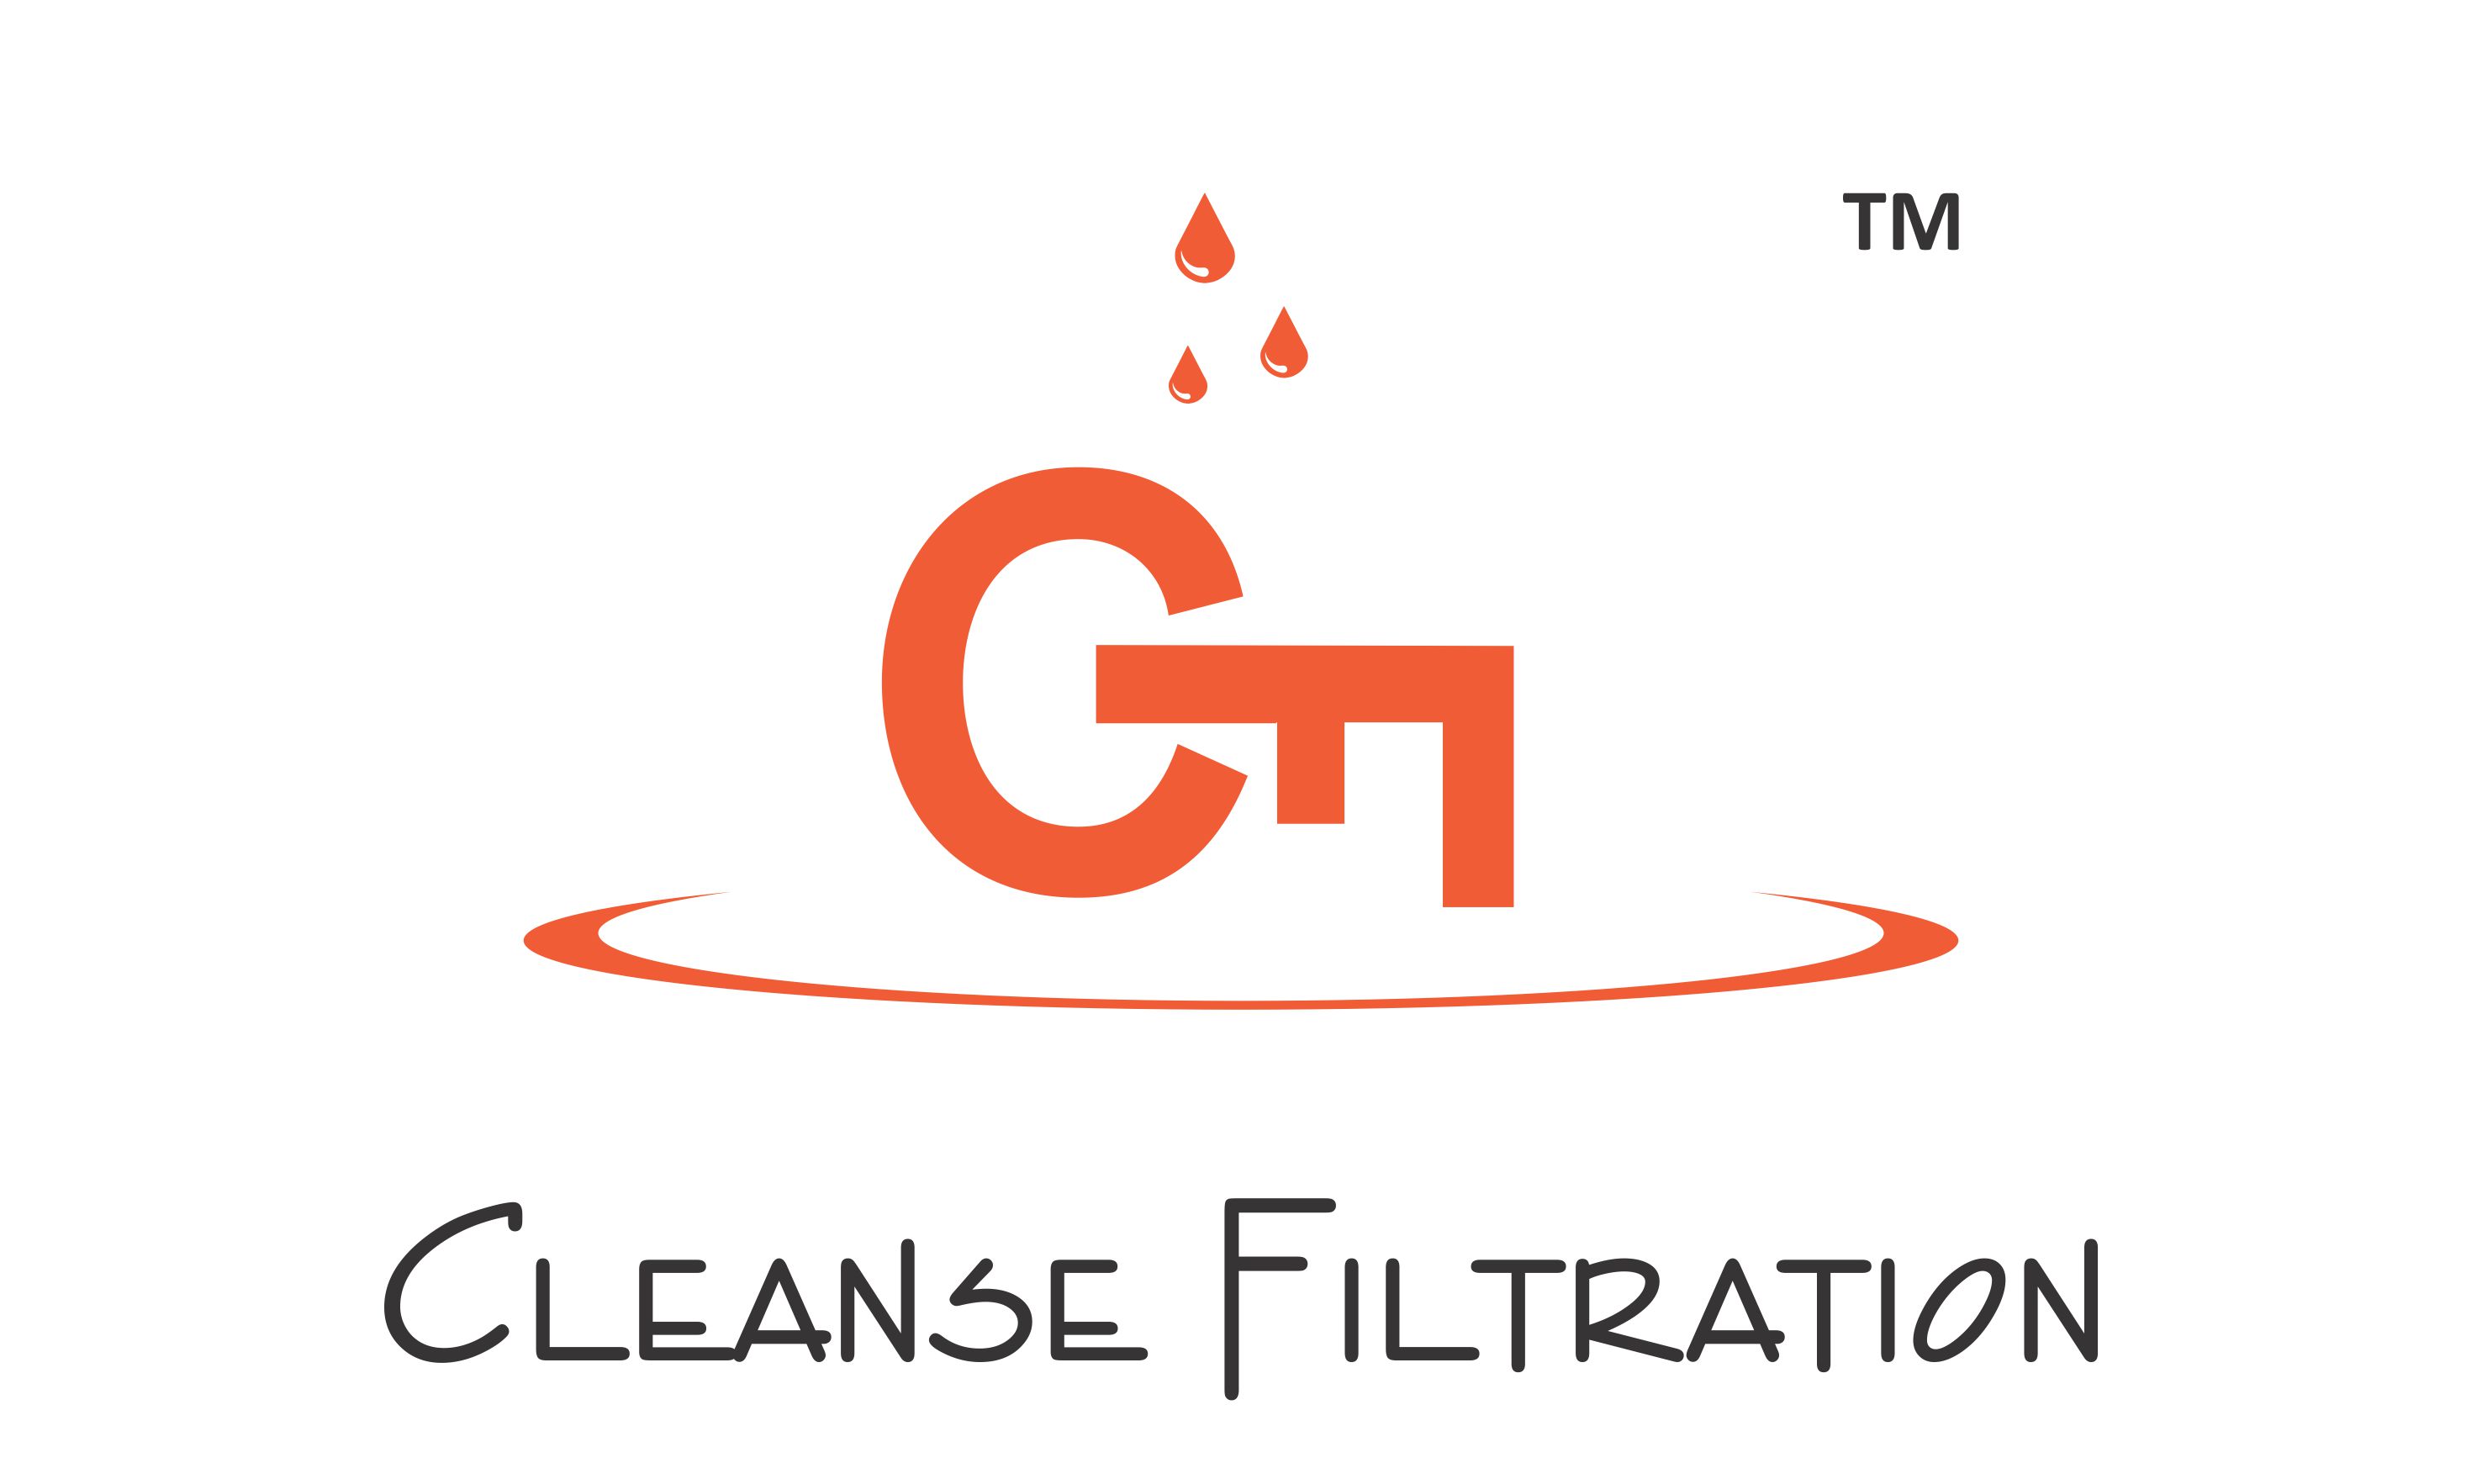 CLEANSE FILTRATION